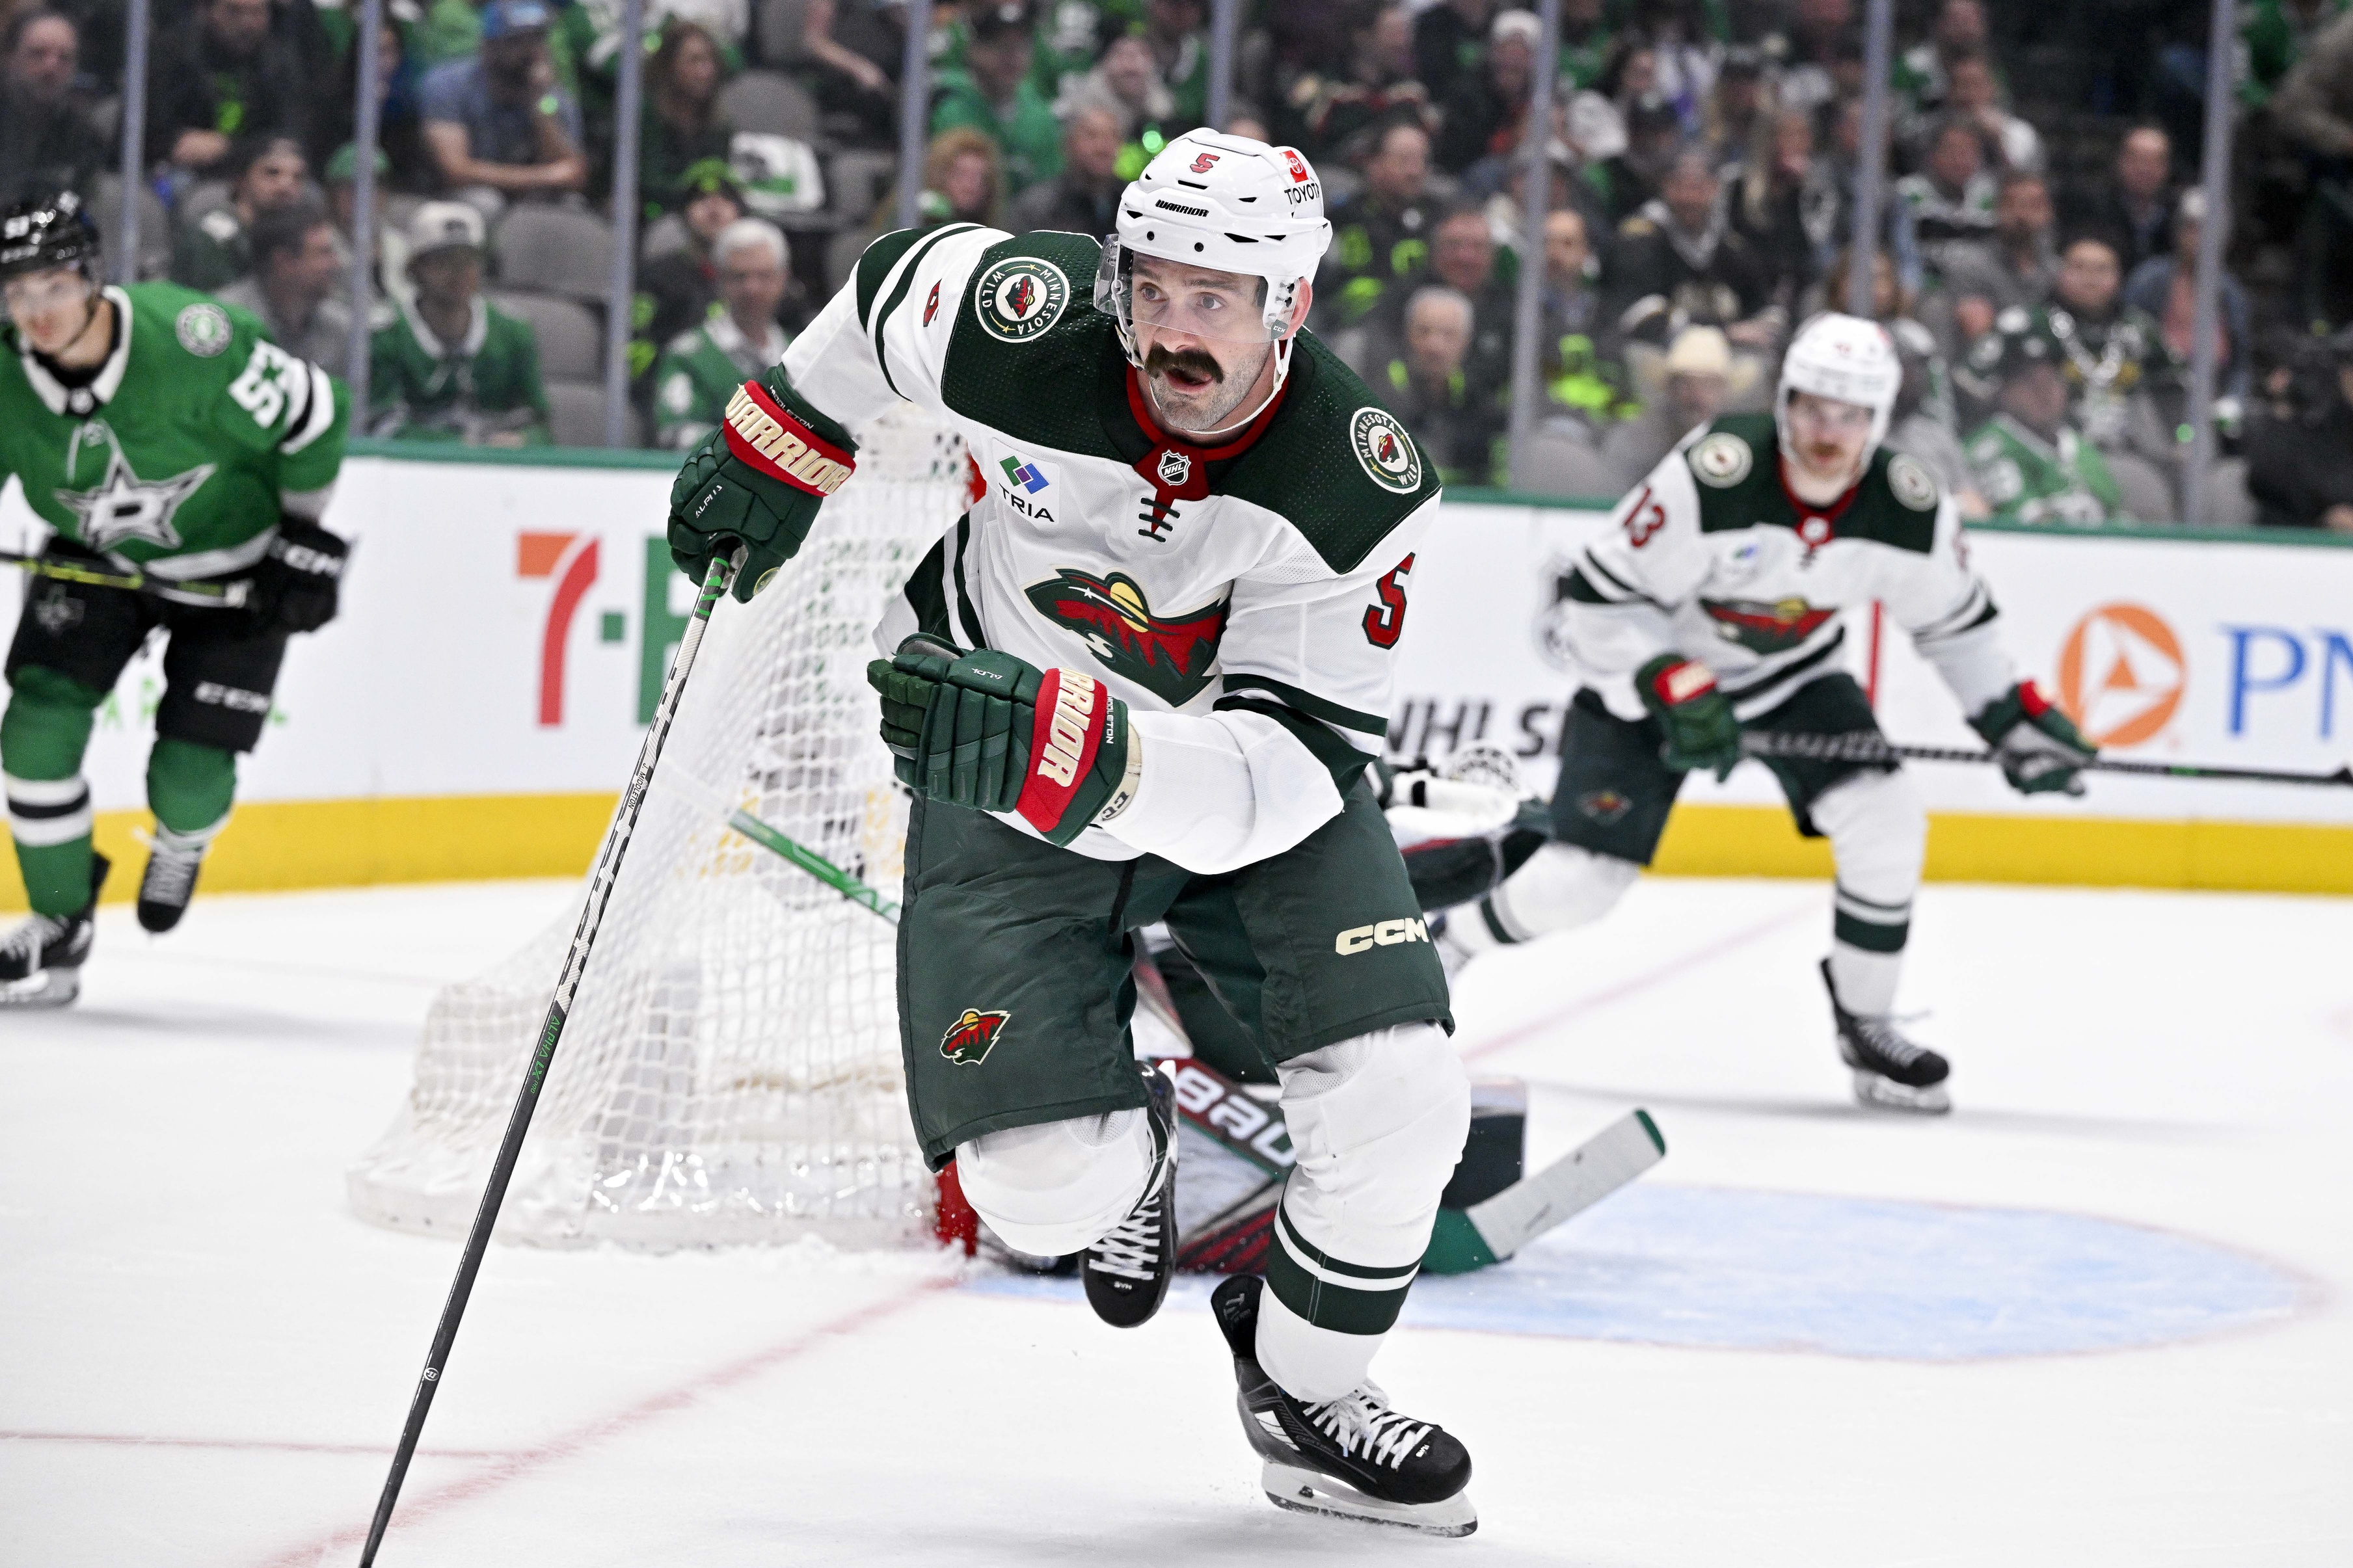 Kirill Kaprizov's new five-year, $45 million contract caps Wild's summer of  bold moves